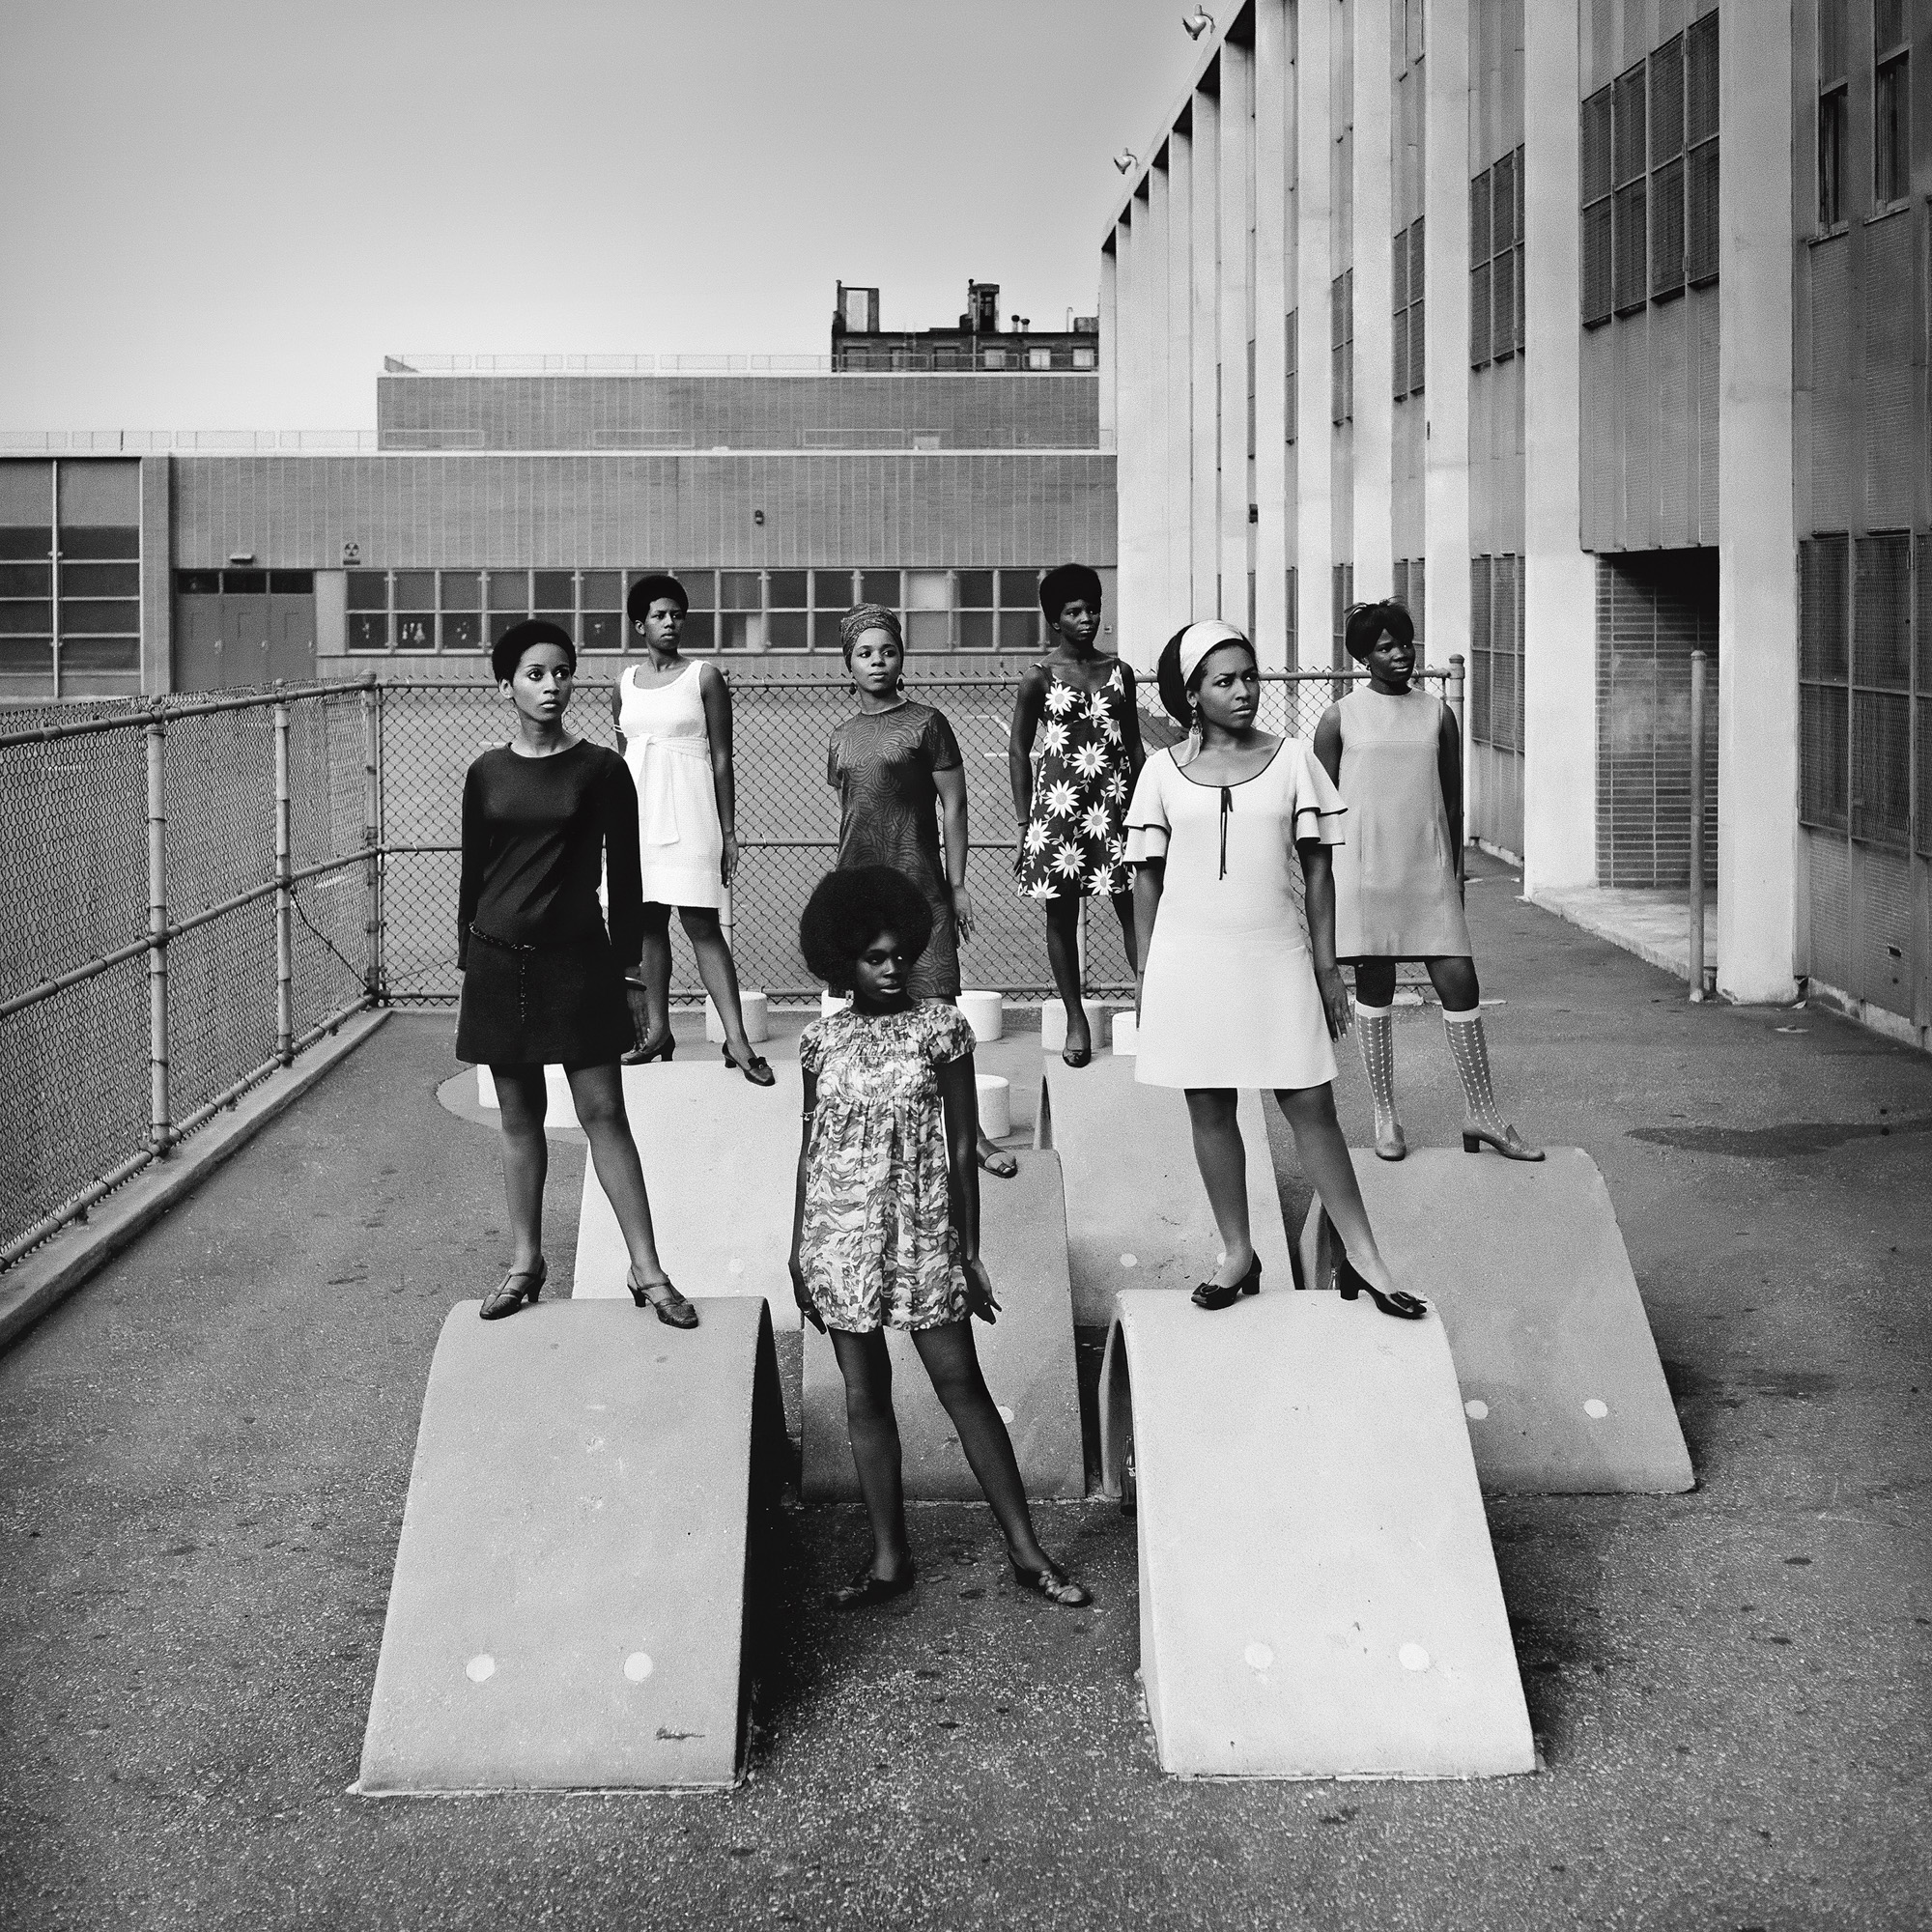 Photo shoot at a public school for one of the AJASS-associated modeling groups that emulated the Grandassa Models and began to embrace natural hairstyles